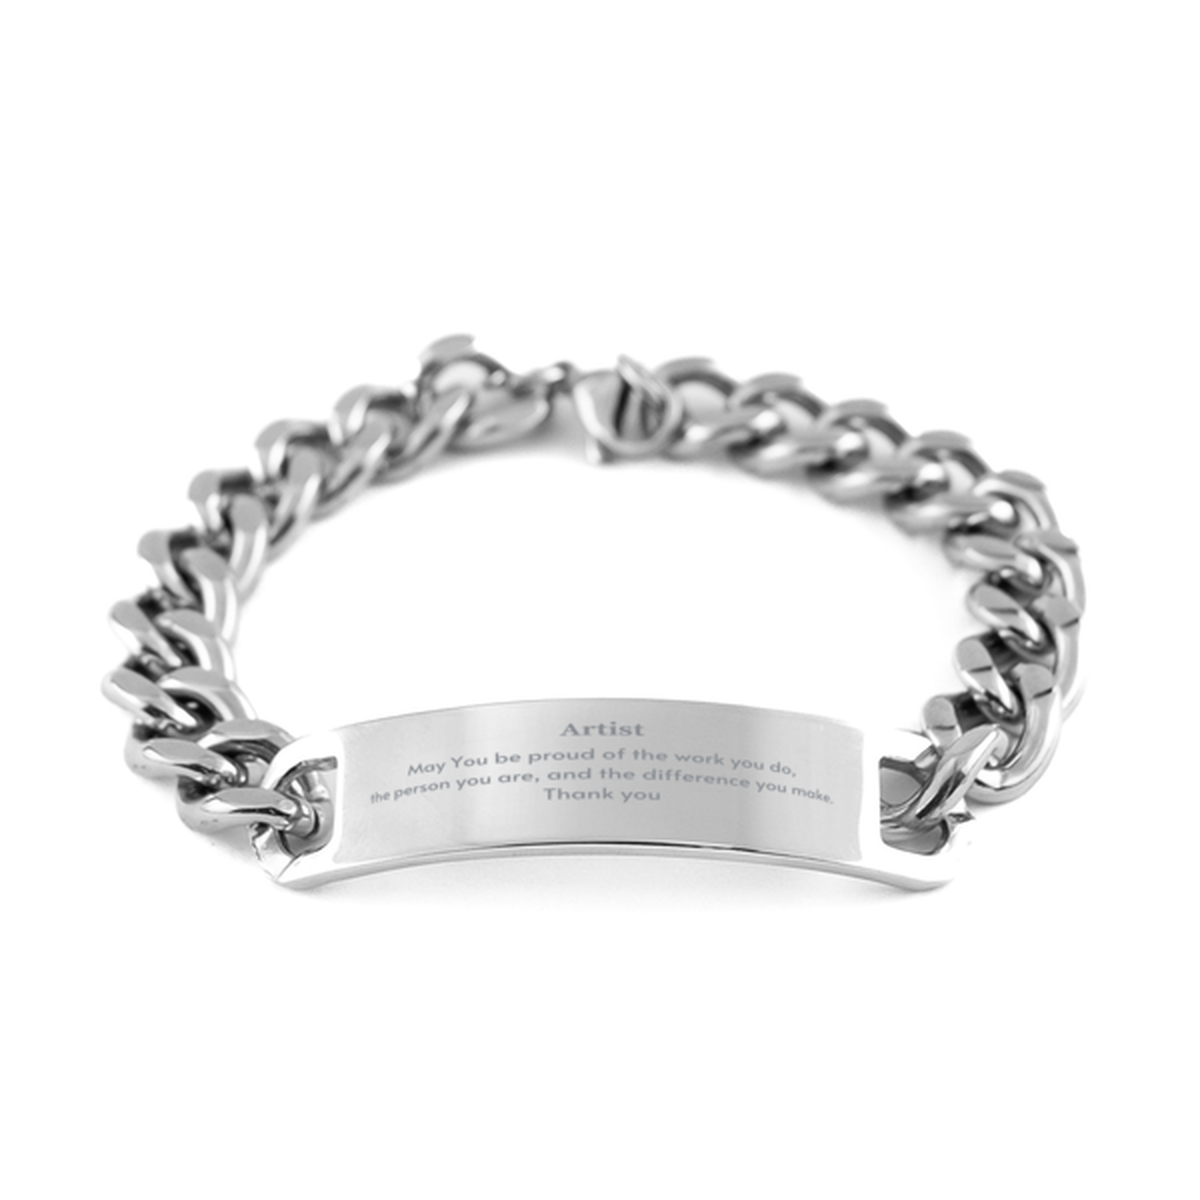 Heartwarming Cuban Chain Stainless Steel Bracelet Retirement Coworkers Gifts for Artist, Artist May You be proud of the work you do, the person you are Gifts for Boss Men Women Friends